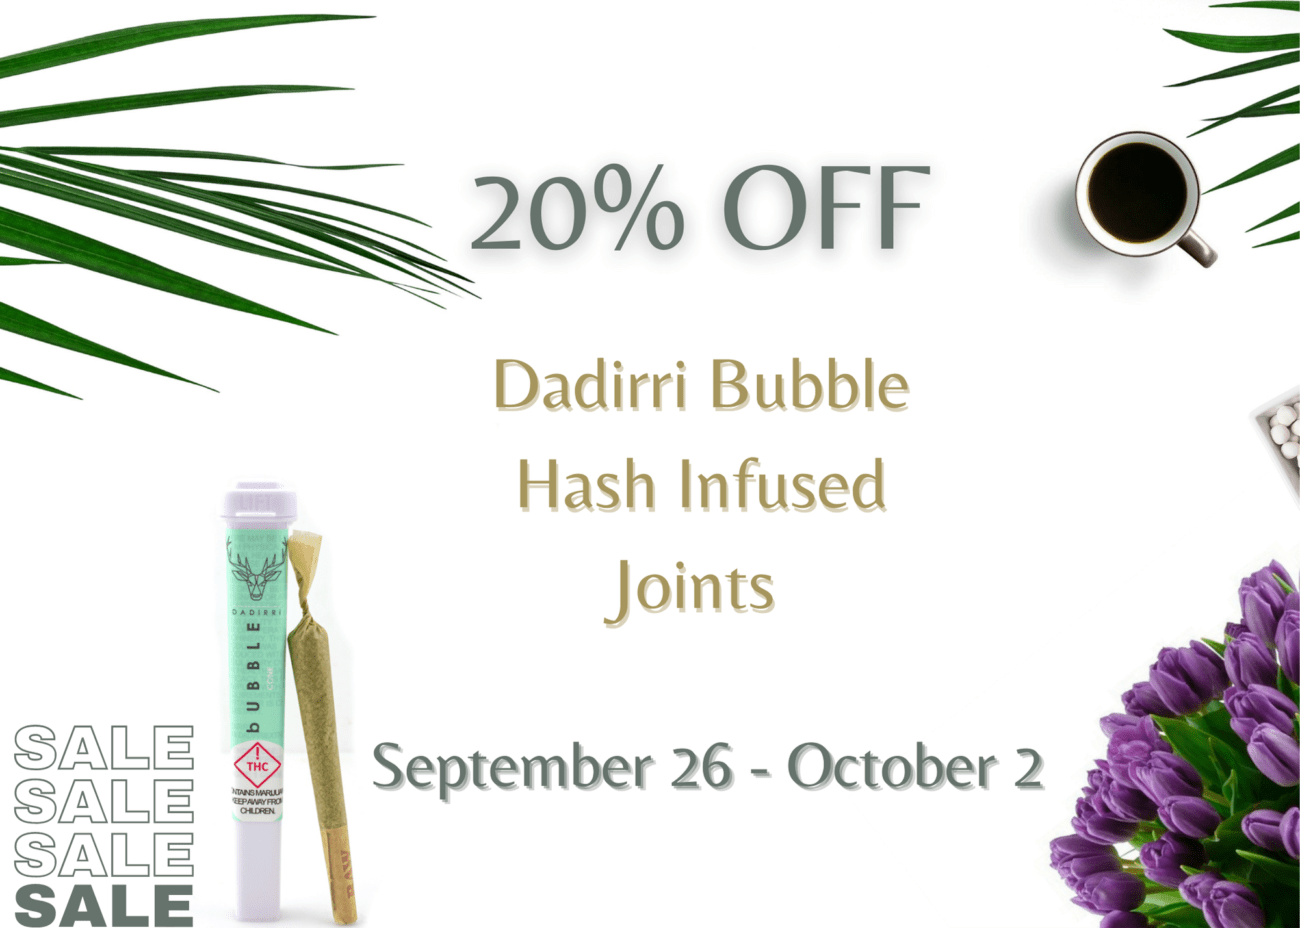 Dadirri bubble hash infused joints are on sale all week! Perfect time to treat yourself!